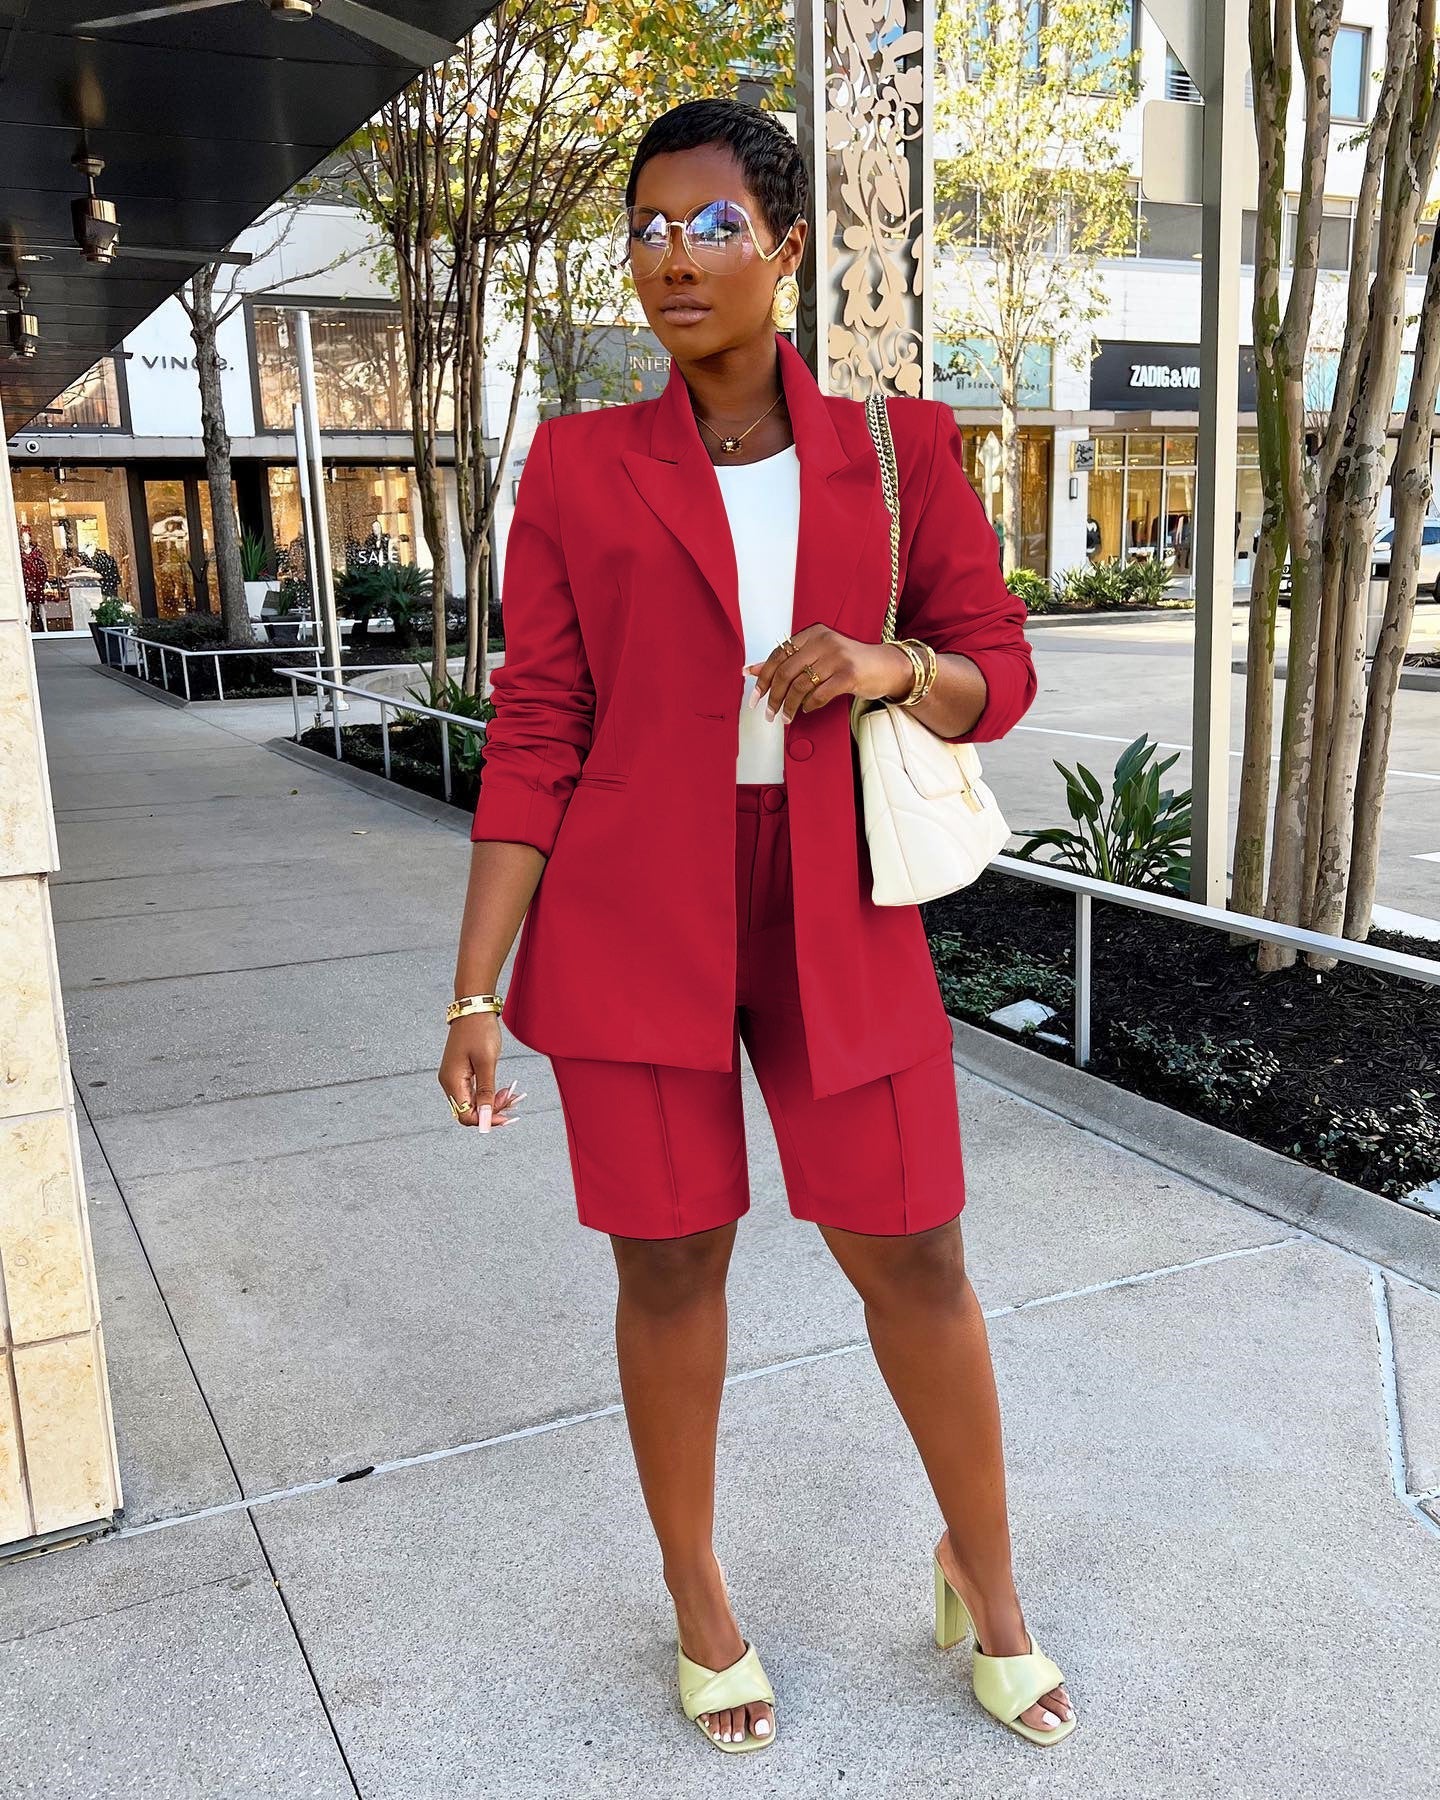 Women Clothing Suit Shorts Jacket Two-Piece Set Spring Summer Office